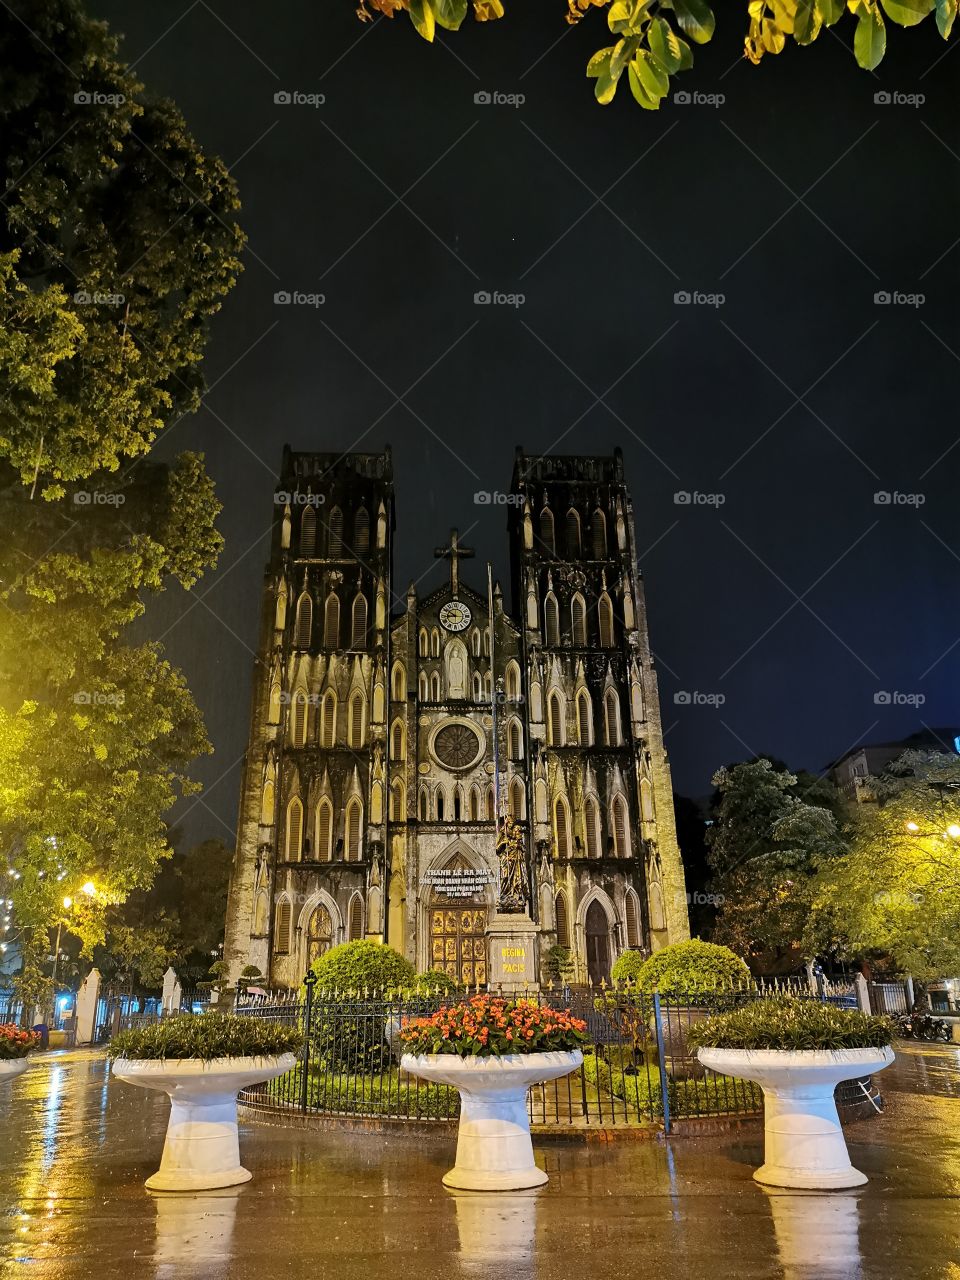 Nightime​ at​ St Joseph​ cathedral​ in​ hanoi​ 🇻🇳